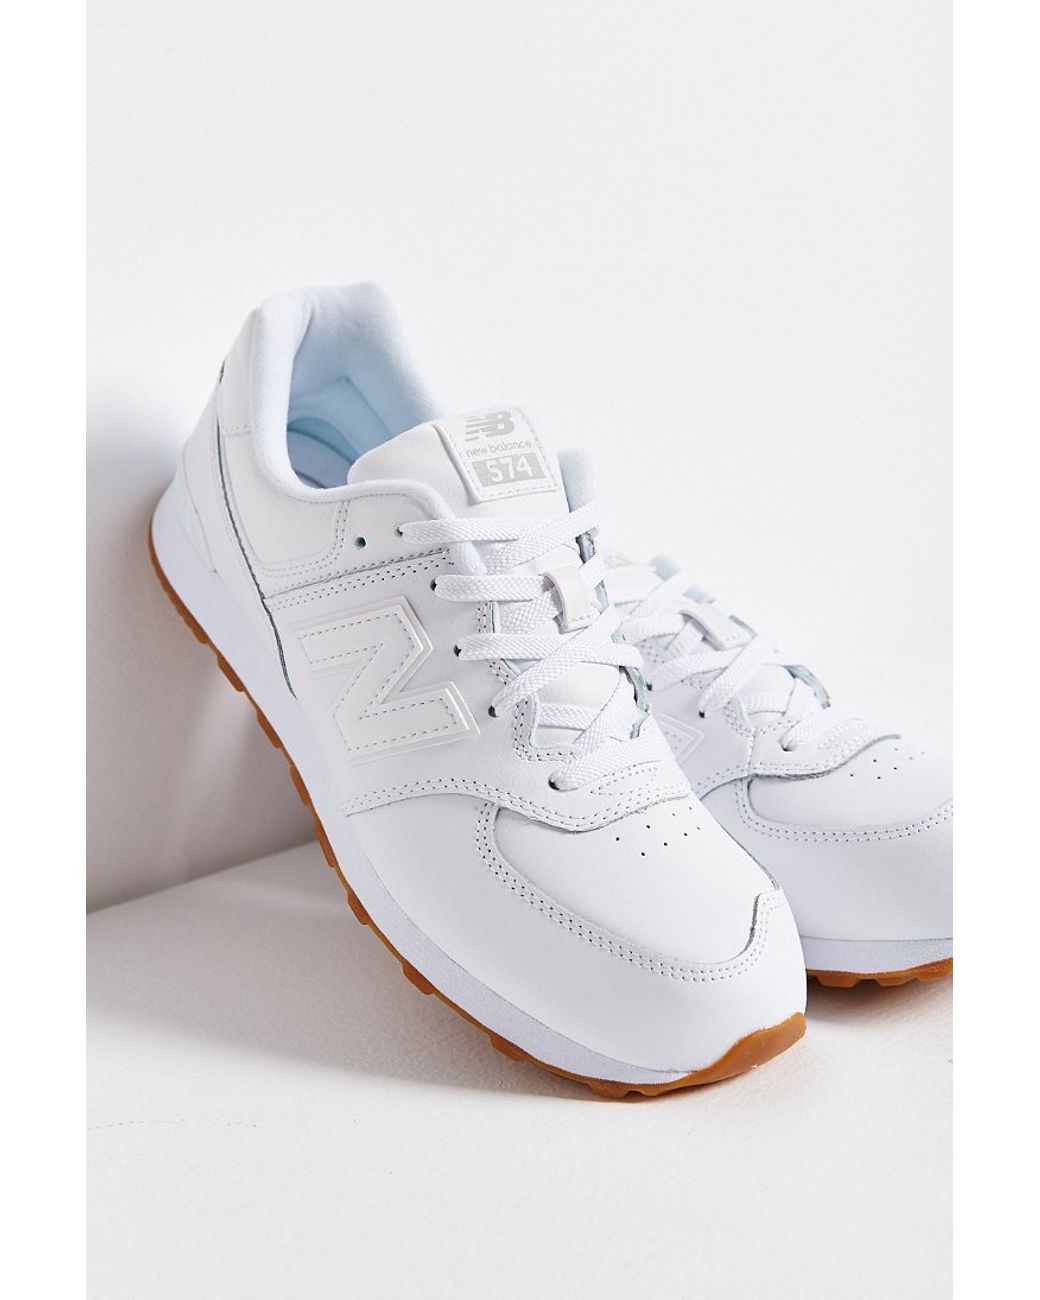 New Balance 574 Leather Sneaker in White | Lyst